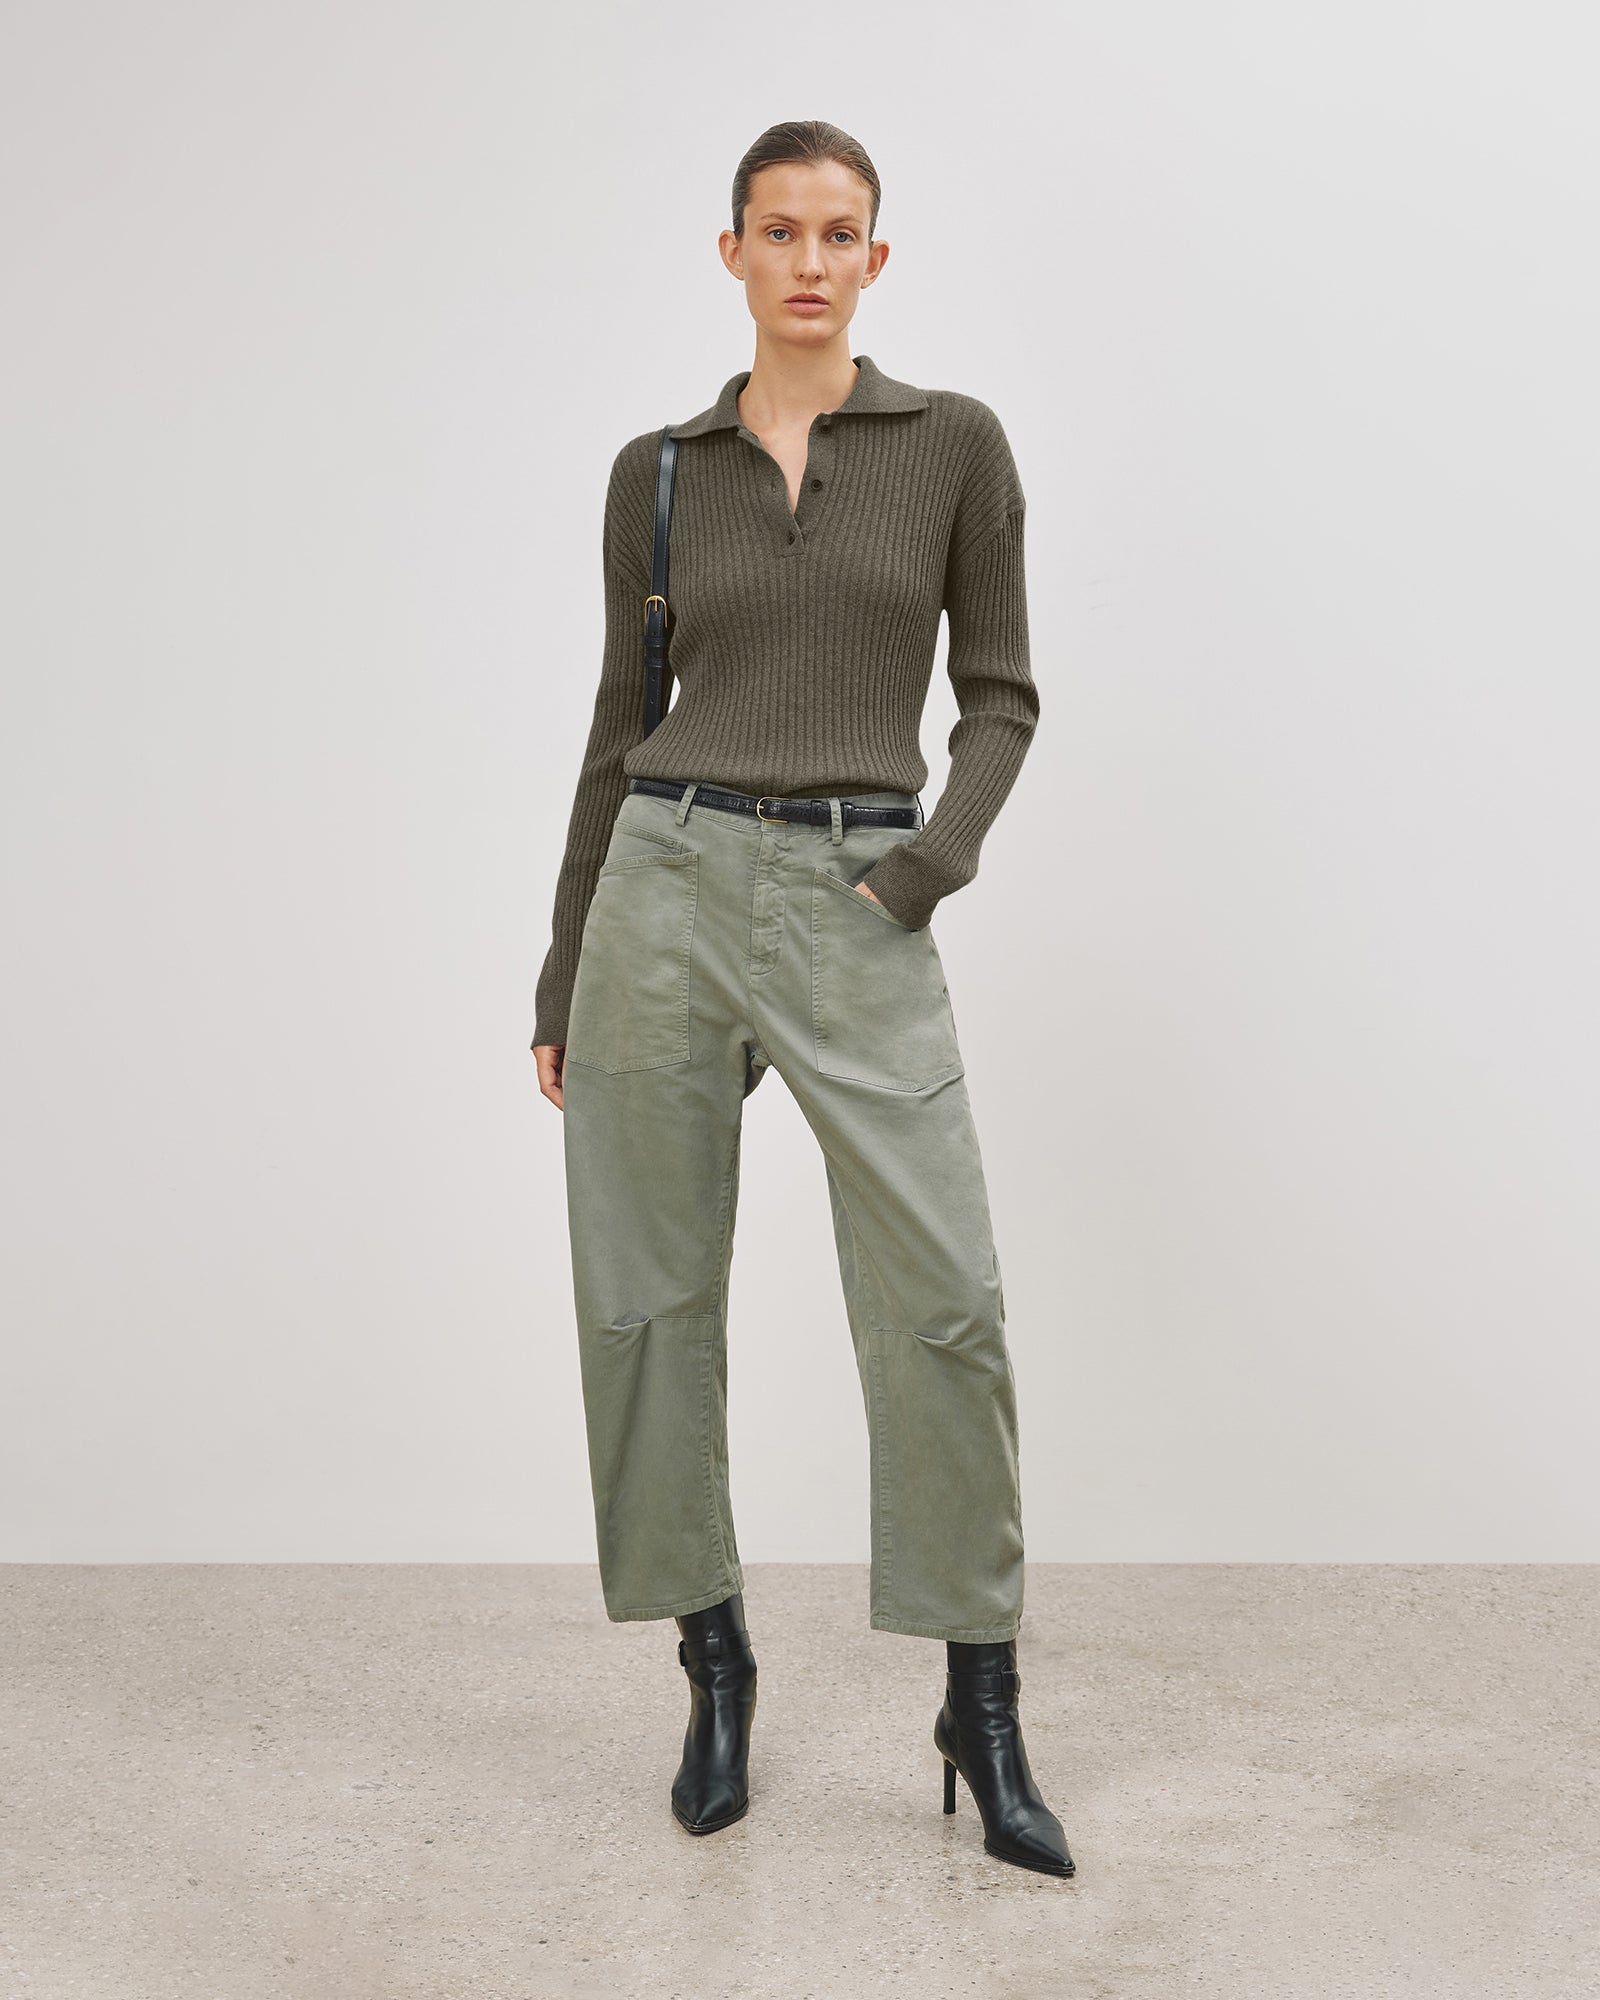 The Nili Lotan Shon Pant in Admiral Green available at The New Trend Australia